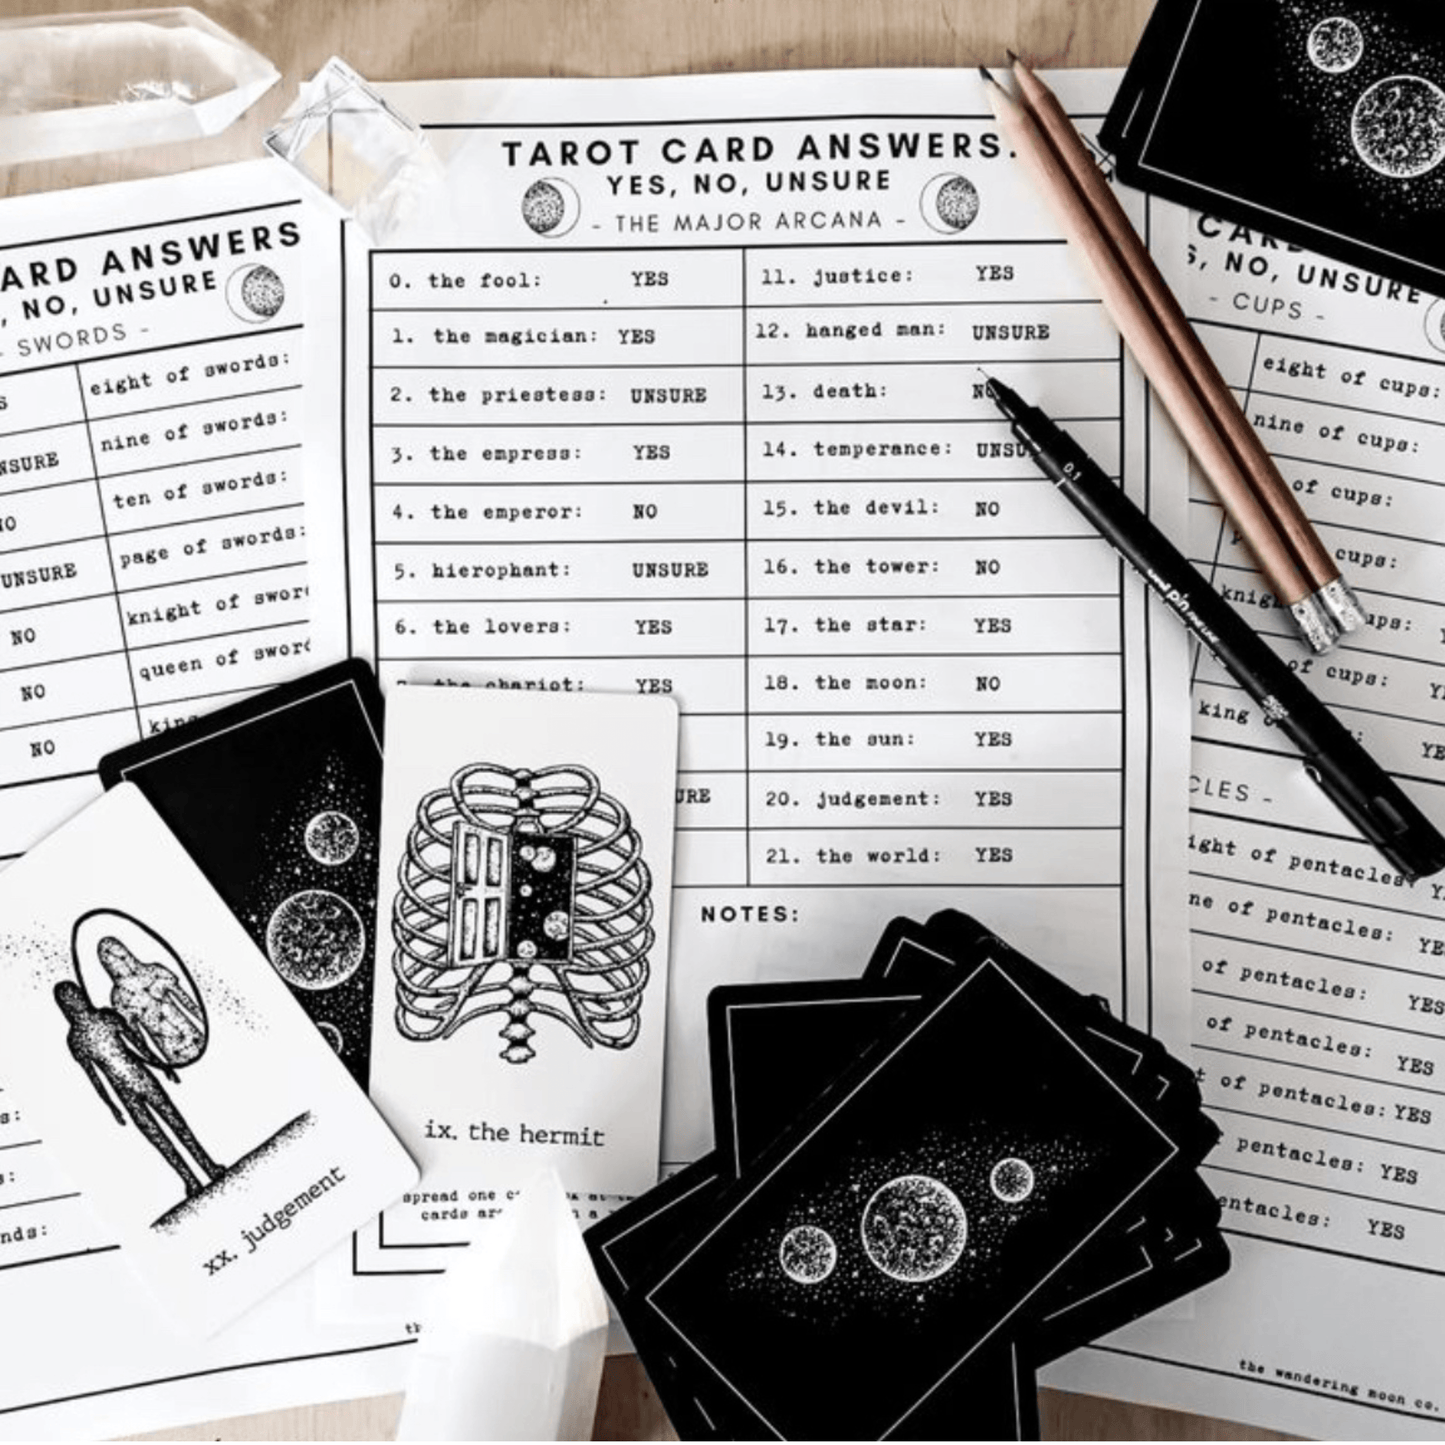 tarot card cheat sheets: set of 7 guides || bestseller bundle - The Wandering Moon Co.